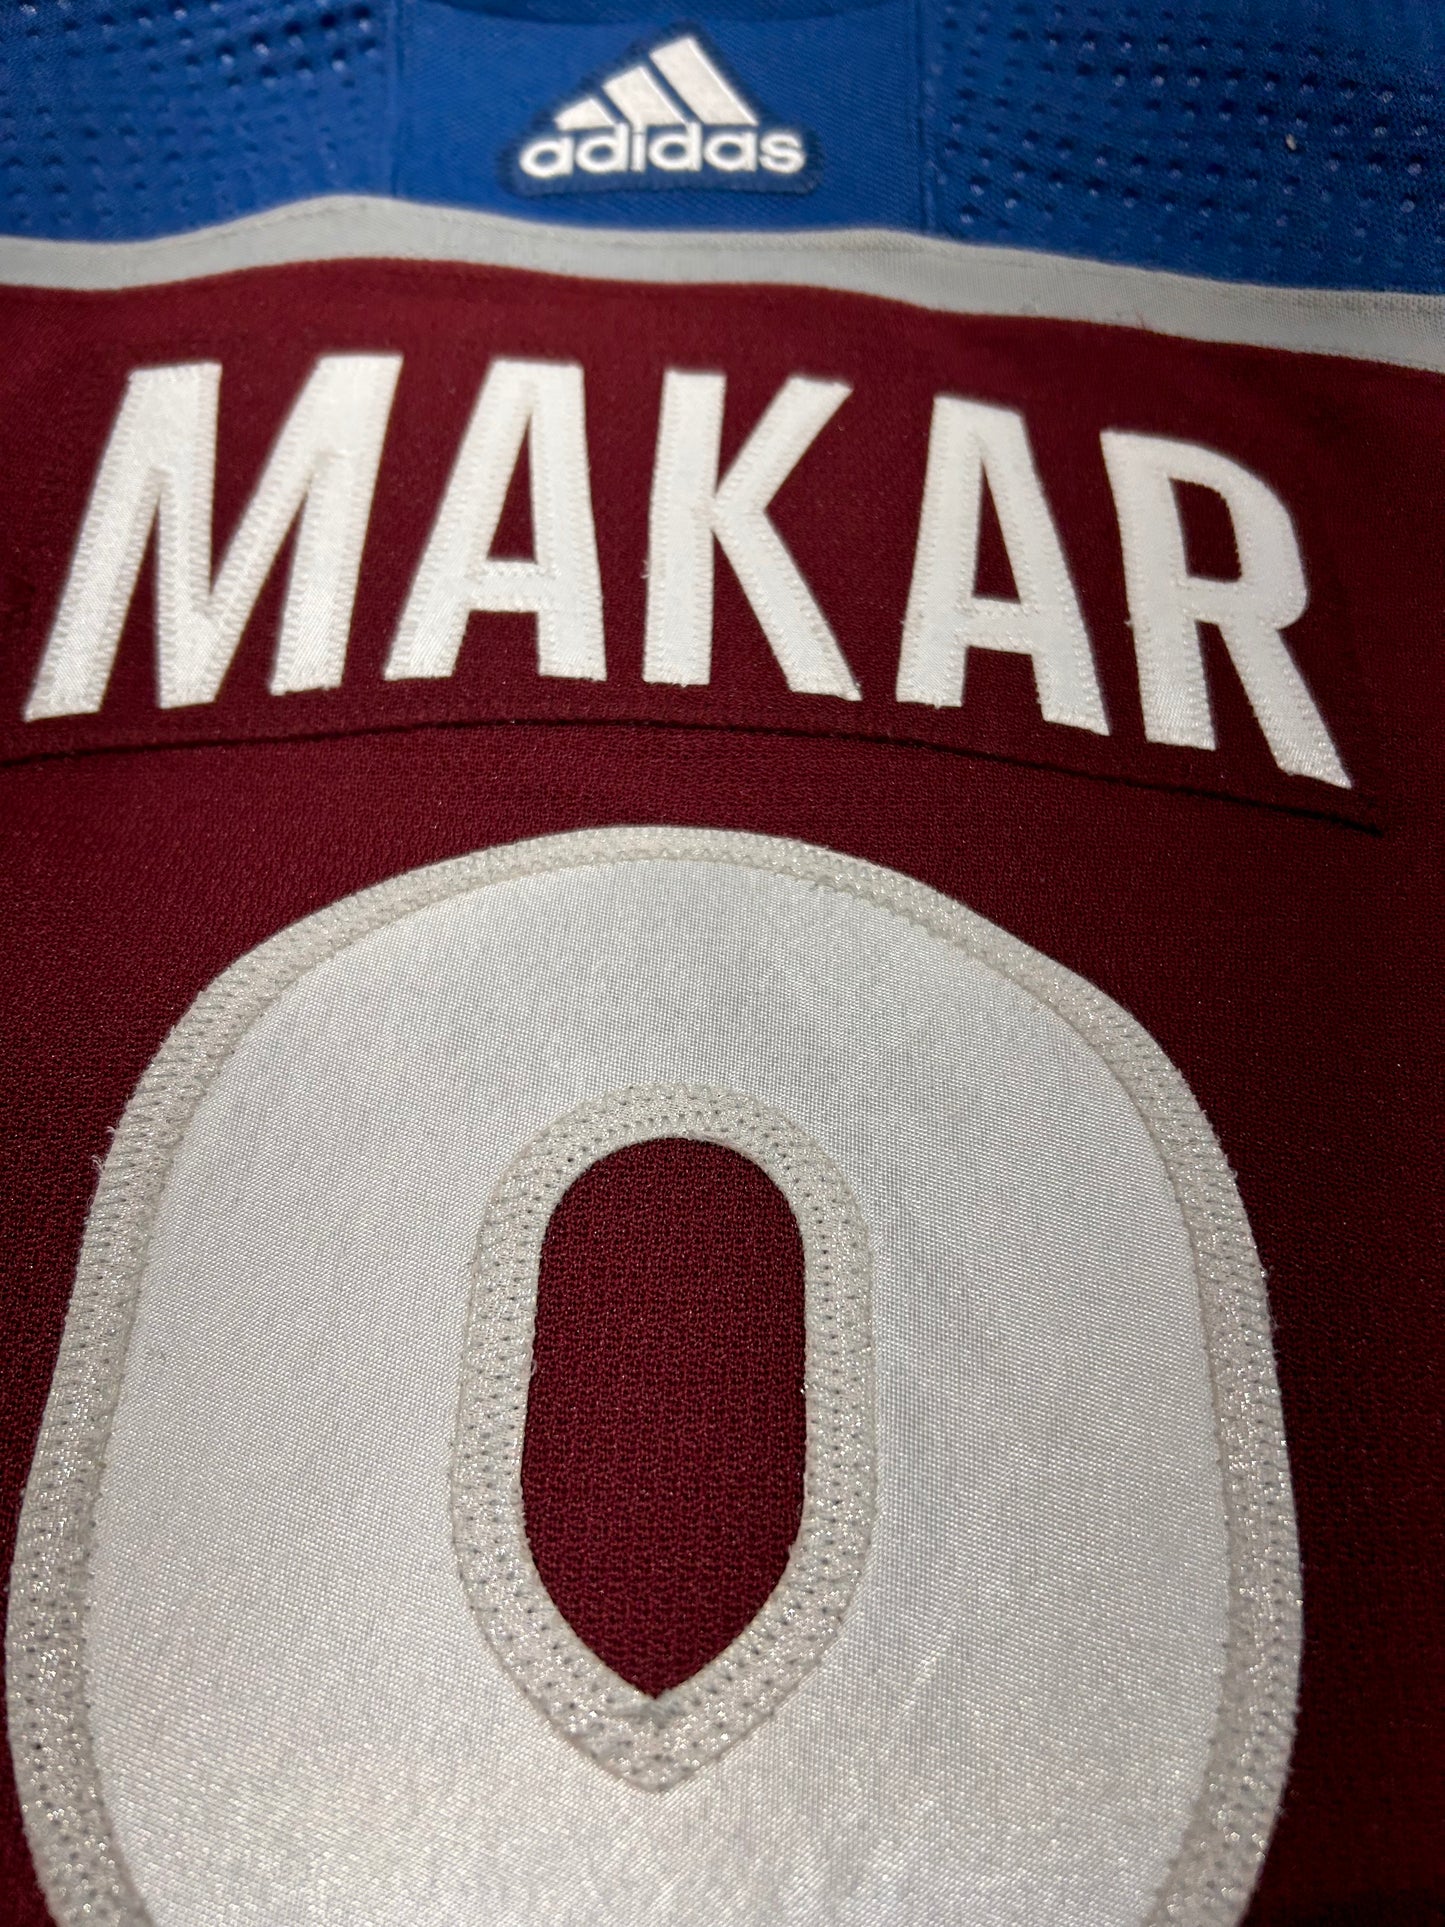 Cale Makar 2022/23 Colorado Avalanche Home #8 Game Worn Jersey